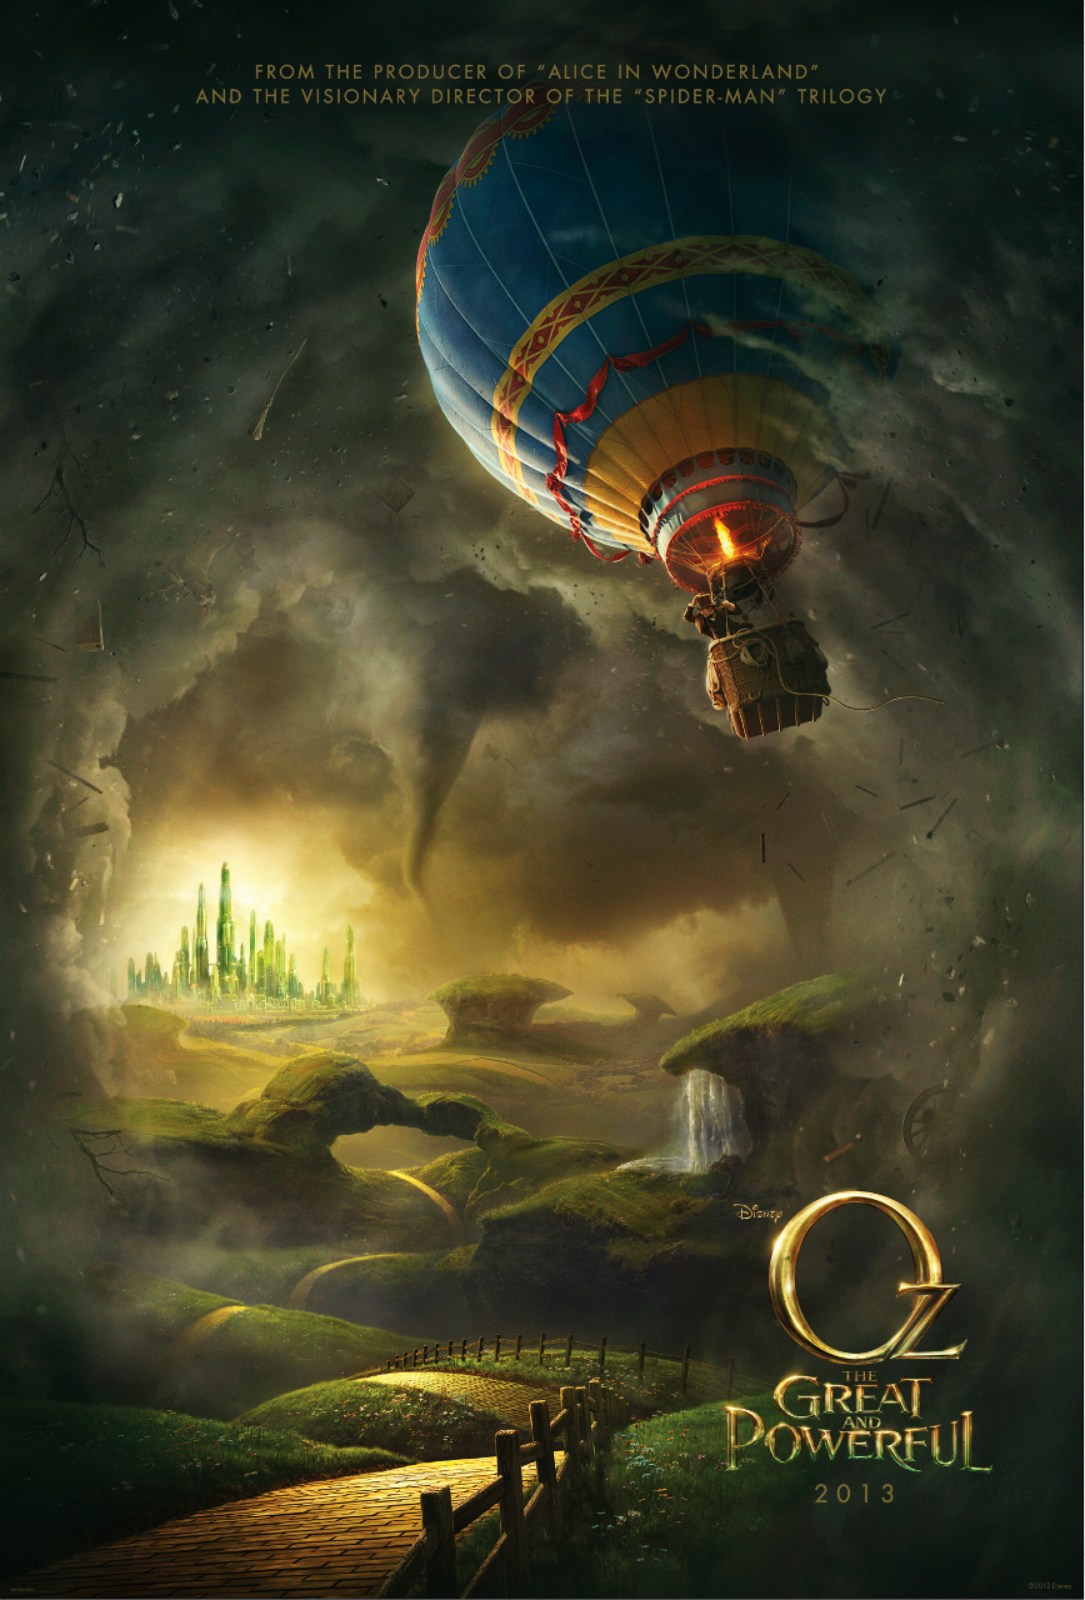 Oz the Great and Powerful - Movie Poster #4 (Original)